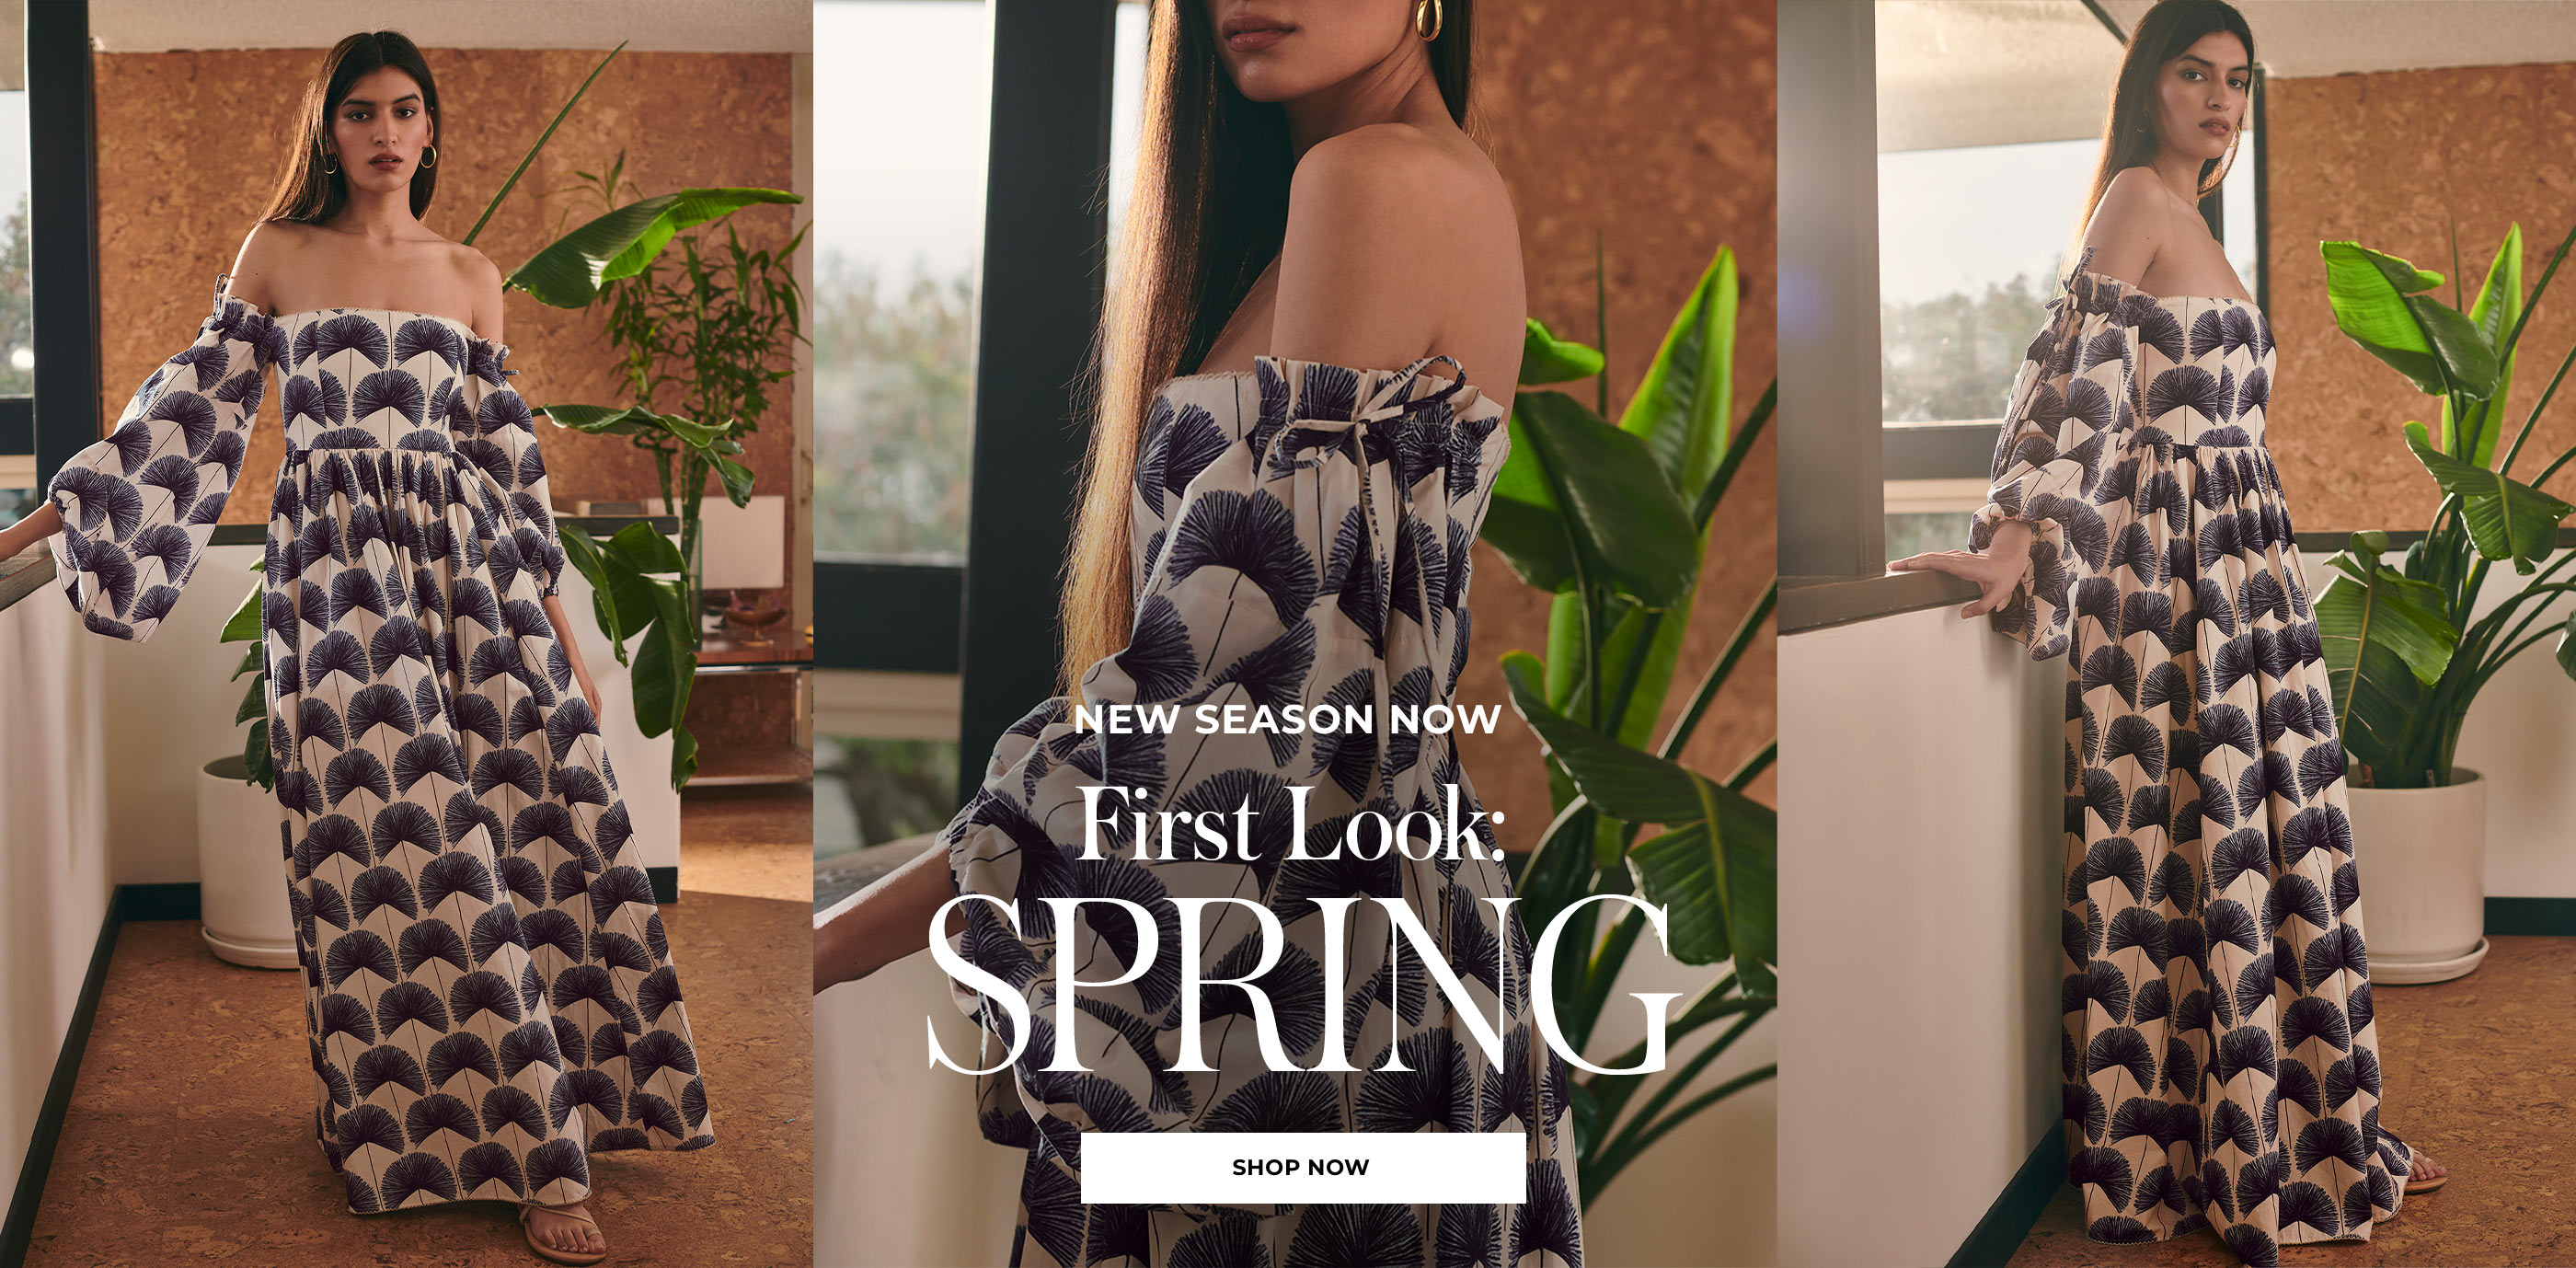 "New Season Now First  Look: Spring"